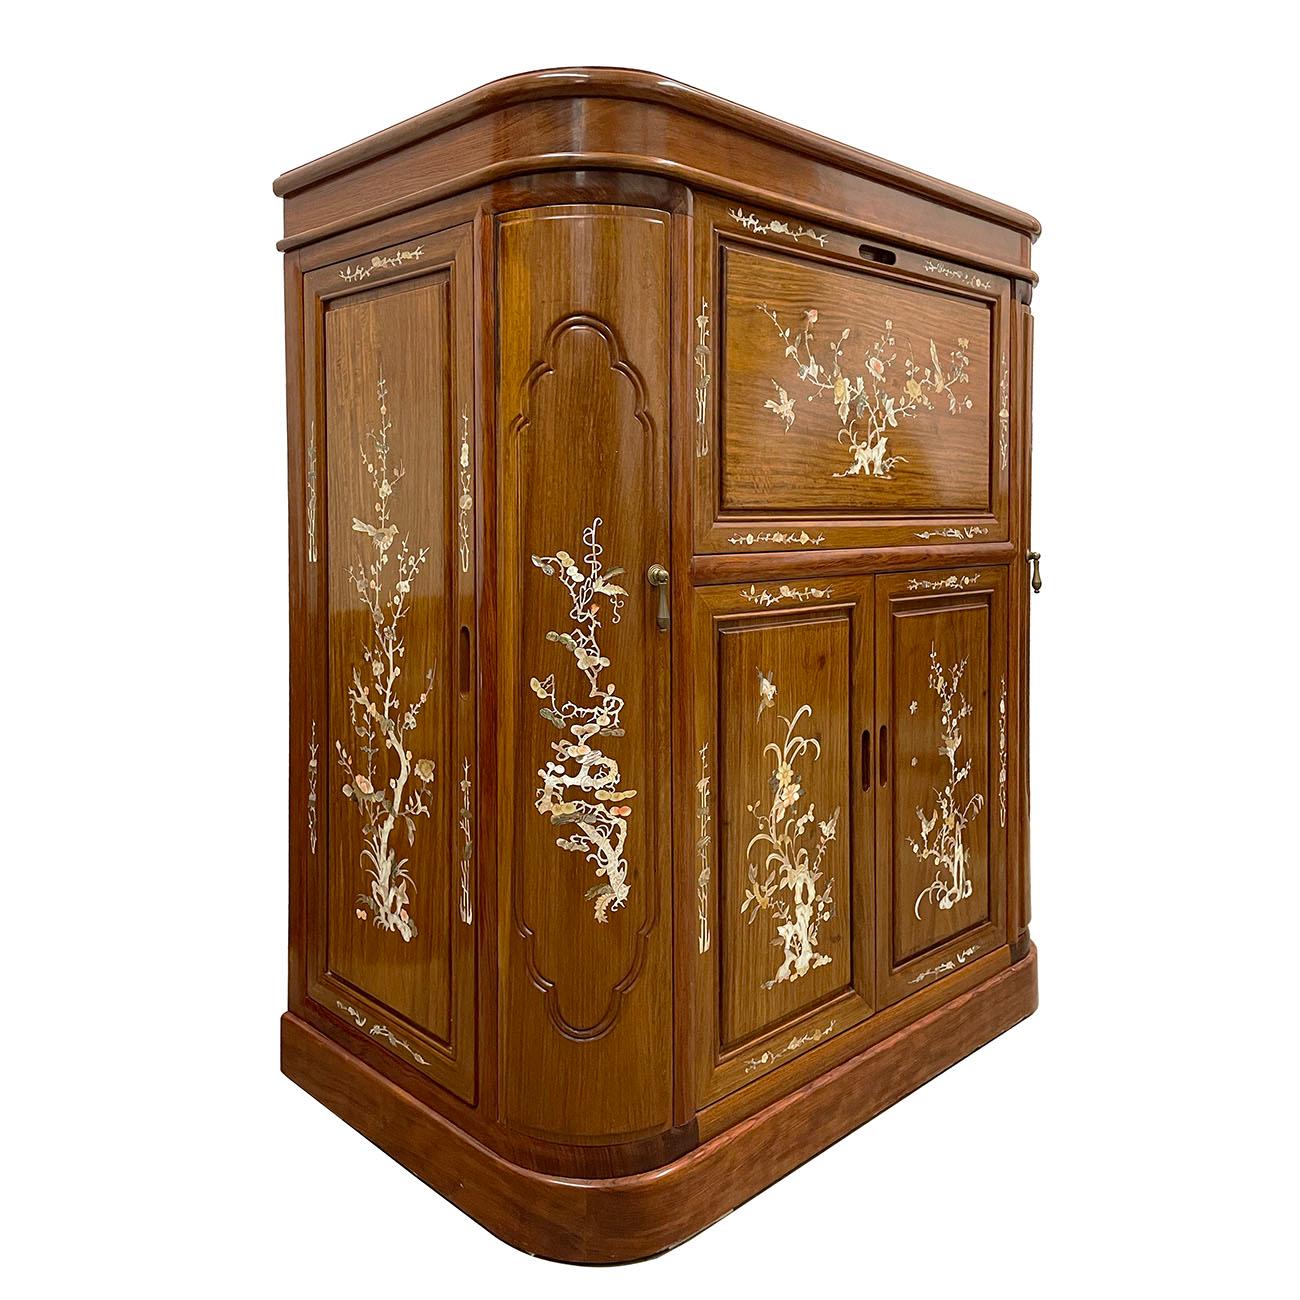 This beautiful carved wine cabinet has lot of detailed Mother of Pearl inlay works on the front and side. This cabinet features top opening and drop down opening on the front with Chinese traditional carving panel behind shelf. Two opening doors